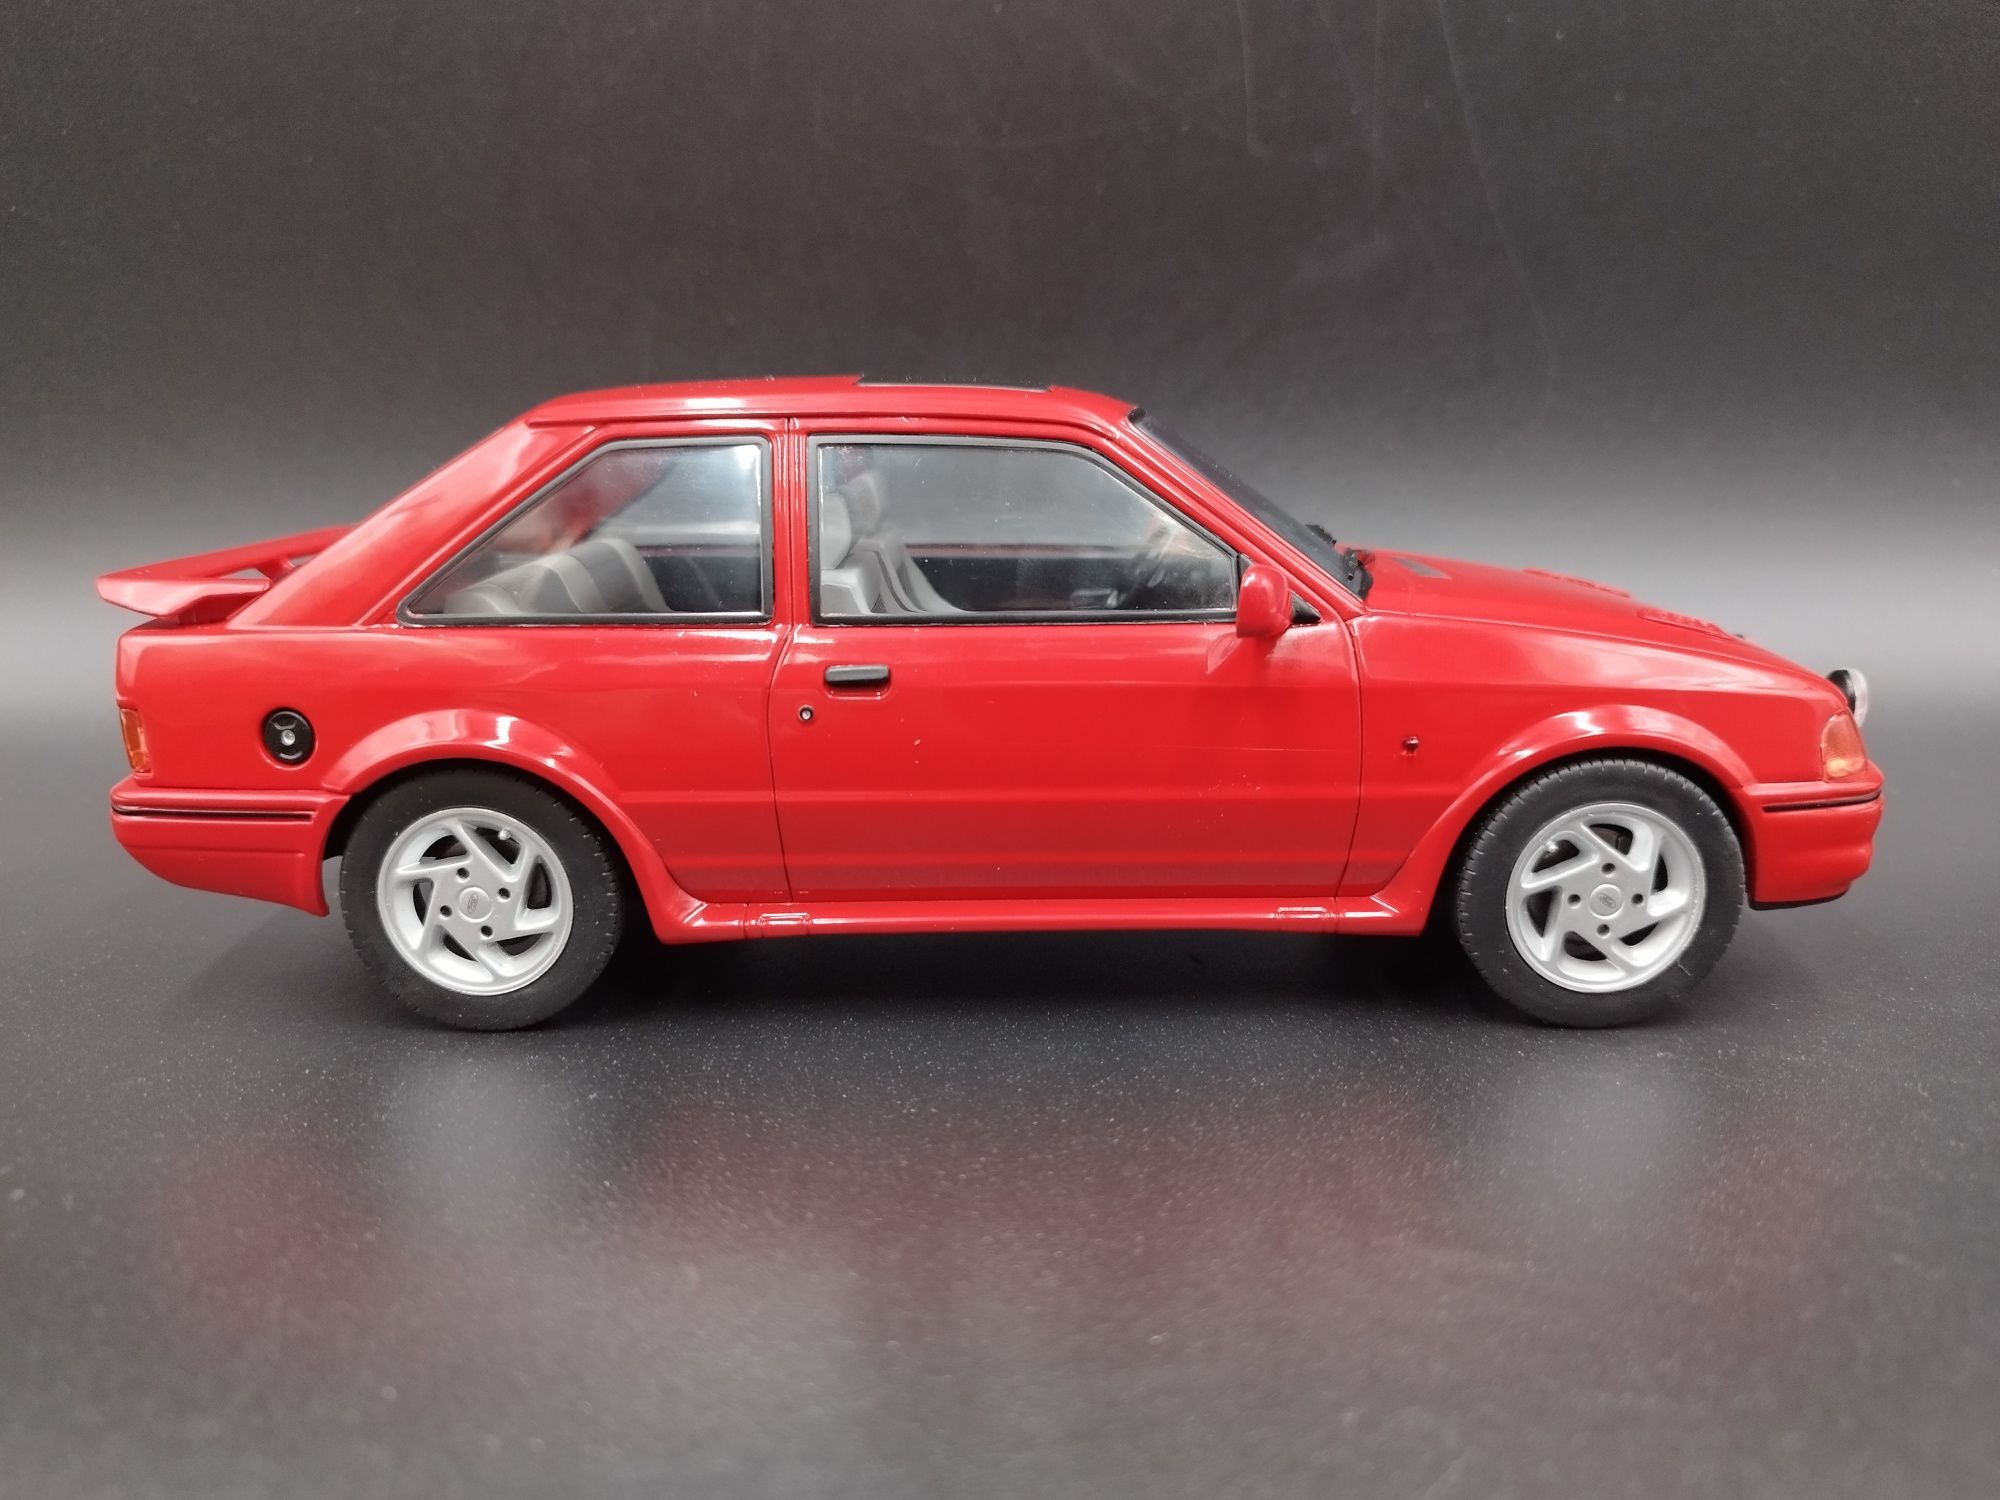 1:18 MCG Ford Escort  RS Turbo S2 Red model  nowy